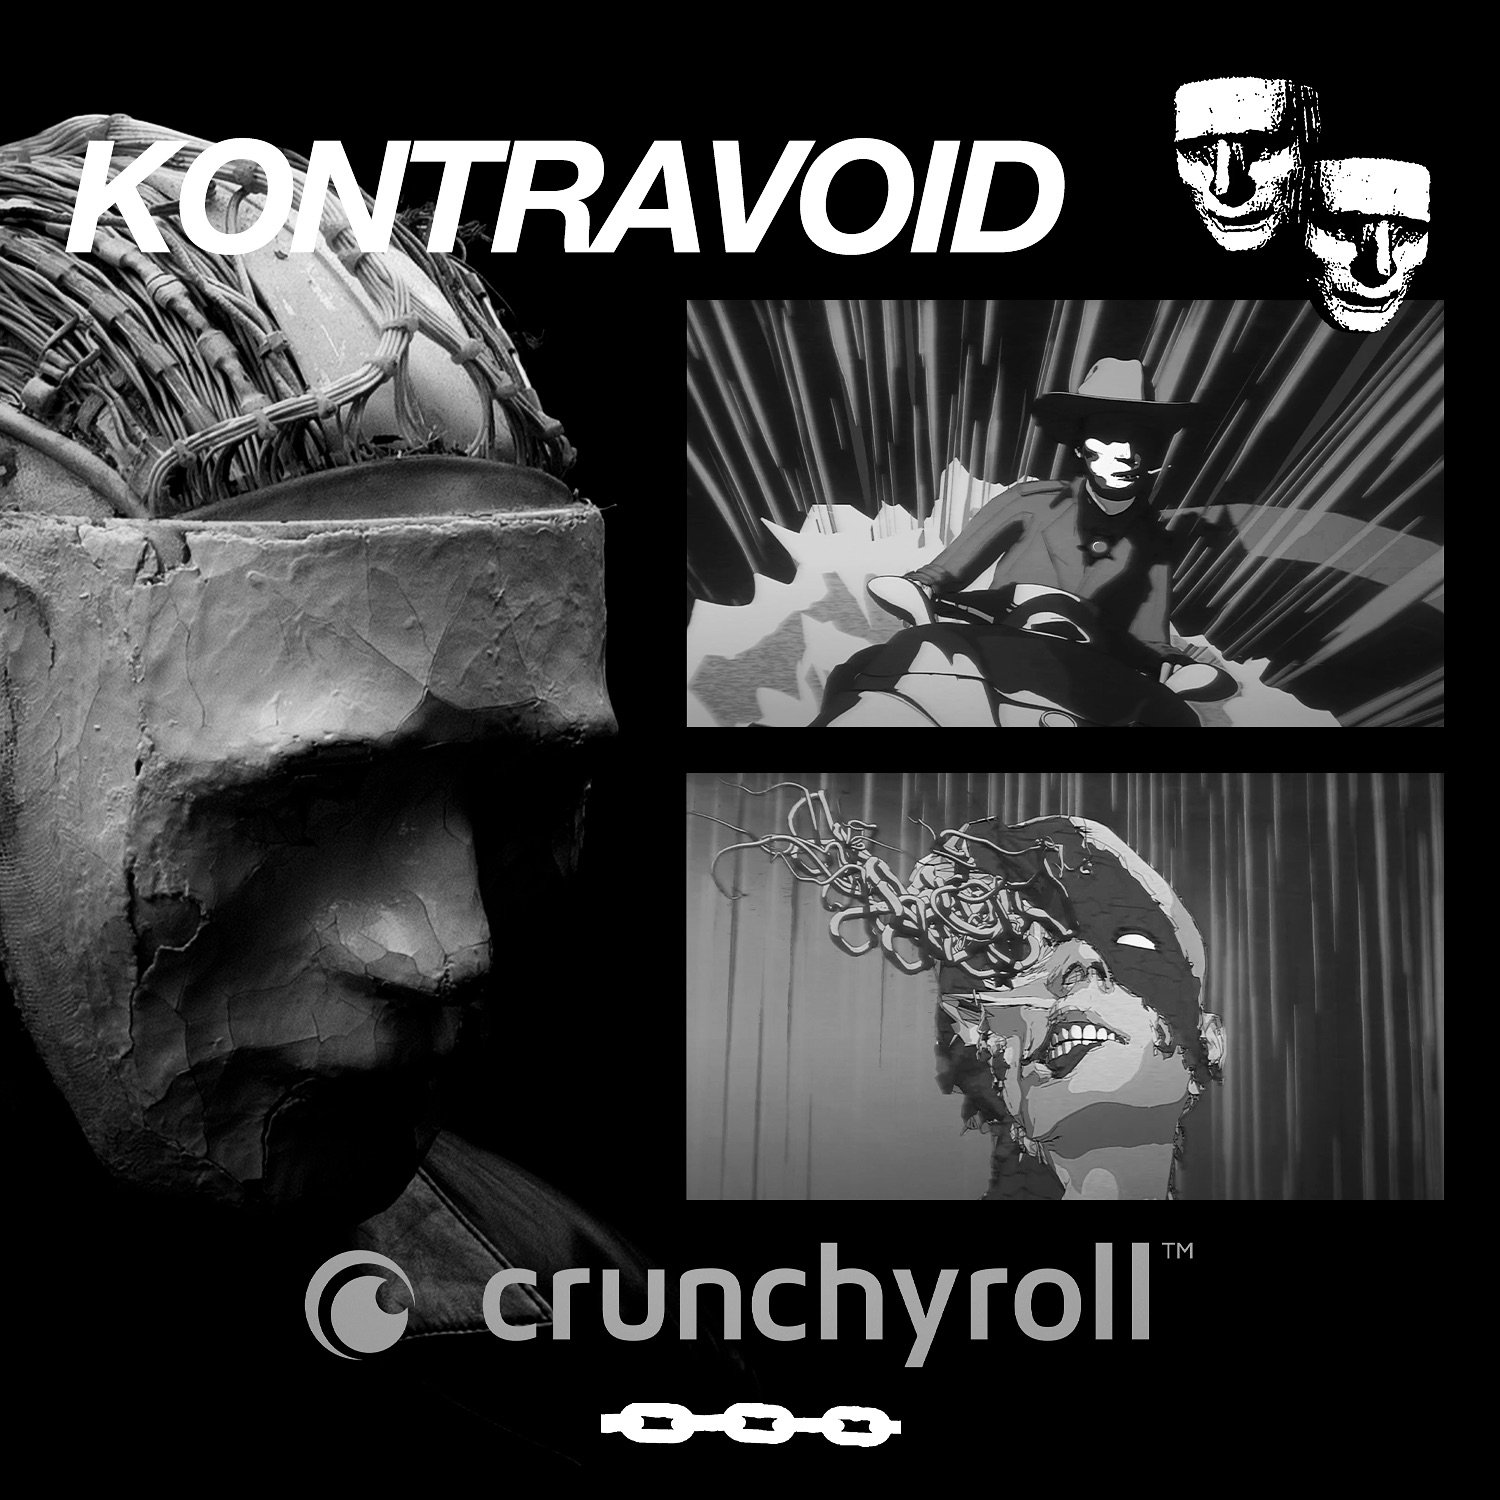 @kontravoid&rsquo;s anime-inspired &ldquo;Reckoning&rdquo; music video, released in February, is an absolute feast for the eyeballs. Now check out Kontravoid mastermind Cameron Findlay&rsquo;s great new interview with @crunchyroll, going deep into hi